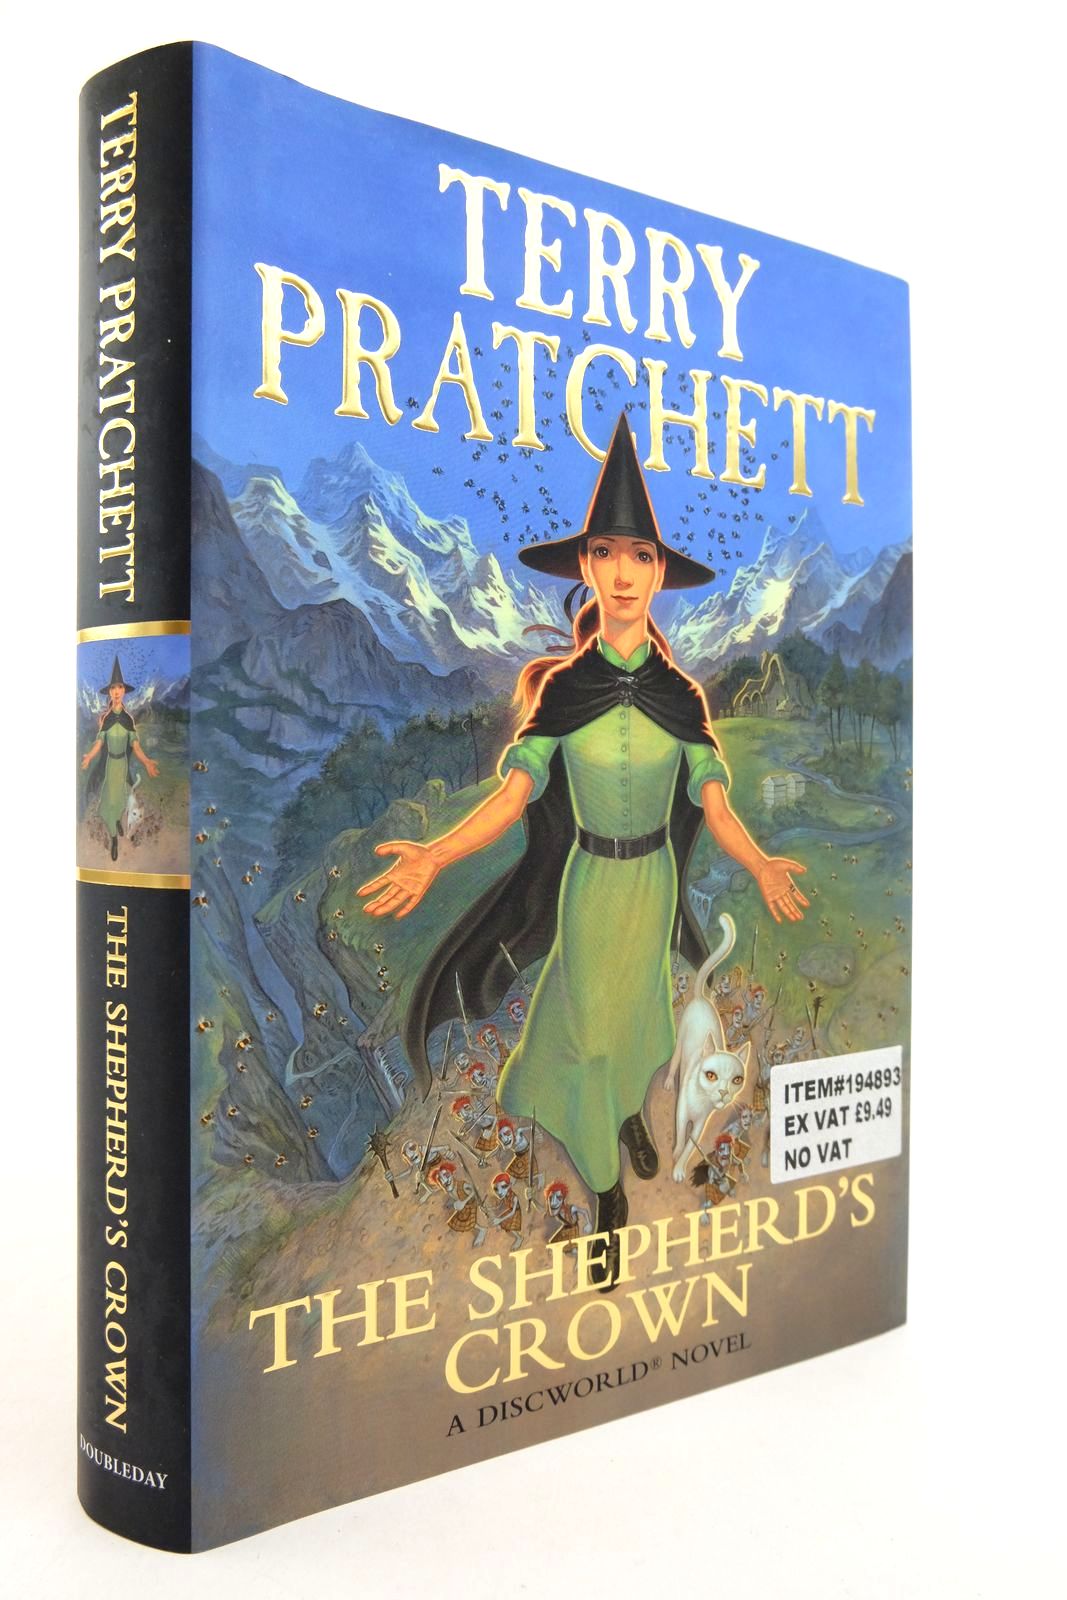 Photo of THE SHEPHERD'S CROWN written by Pratchett, Terry published by Doubleday (STOCK CODE: 2140242)  for sale by Stella & Rose's Books